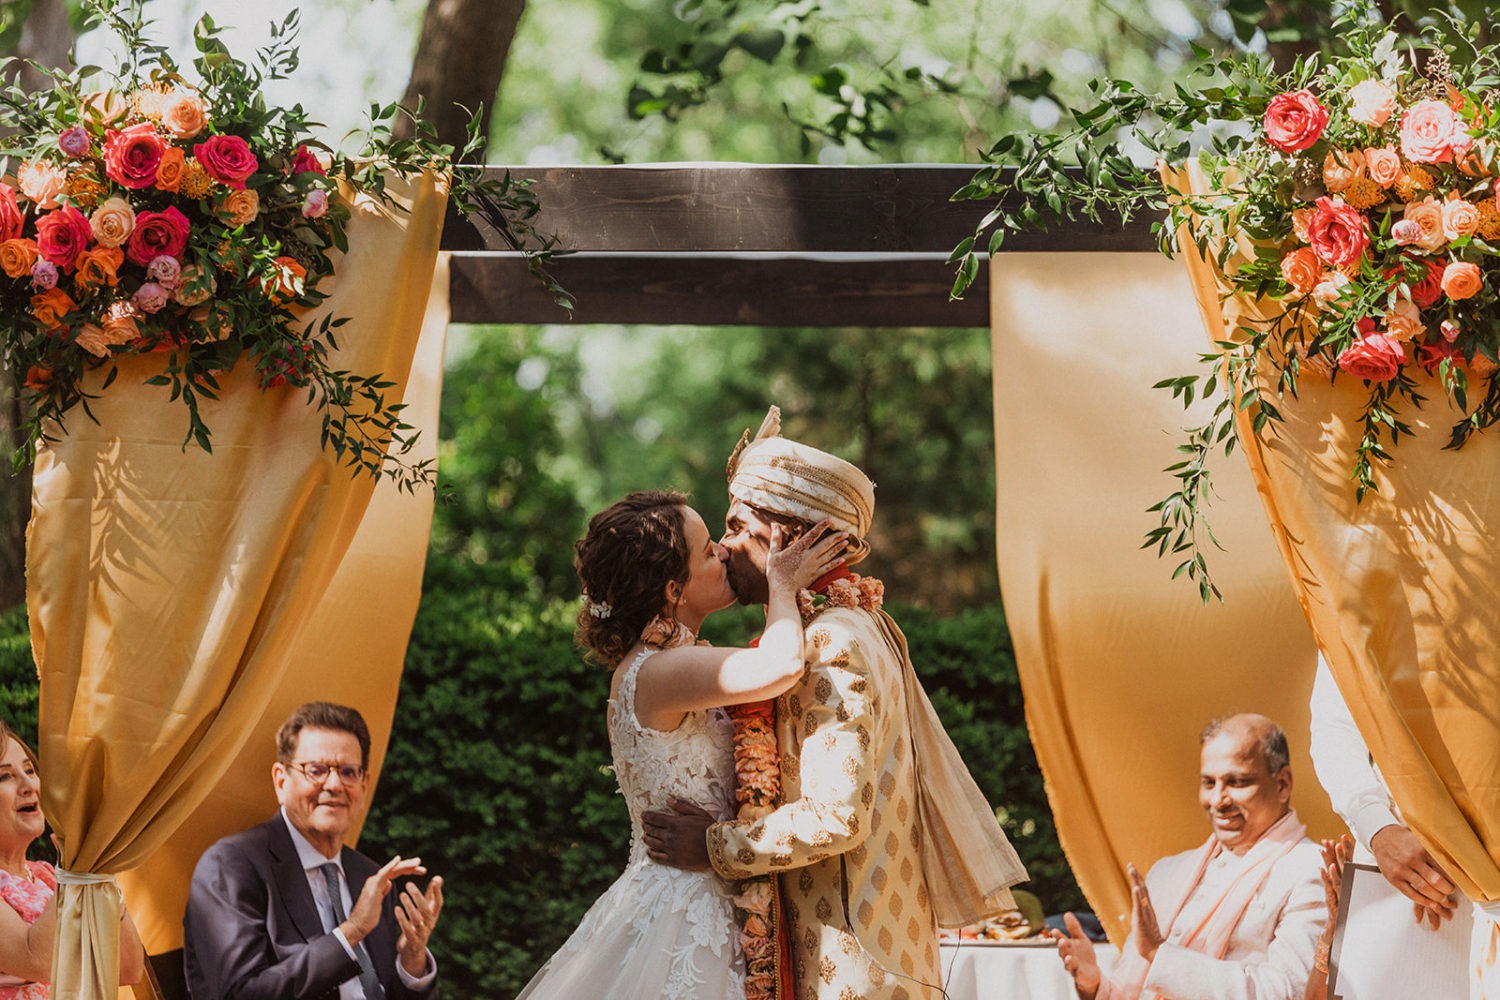 couple kisses under chuppah as part of jewish wedding traditions